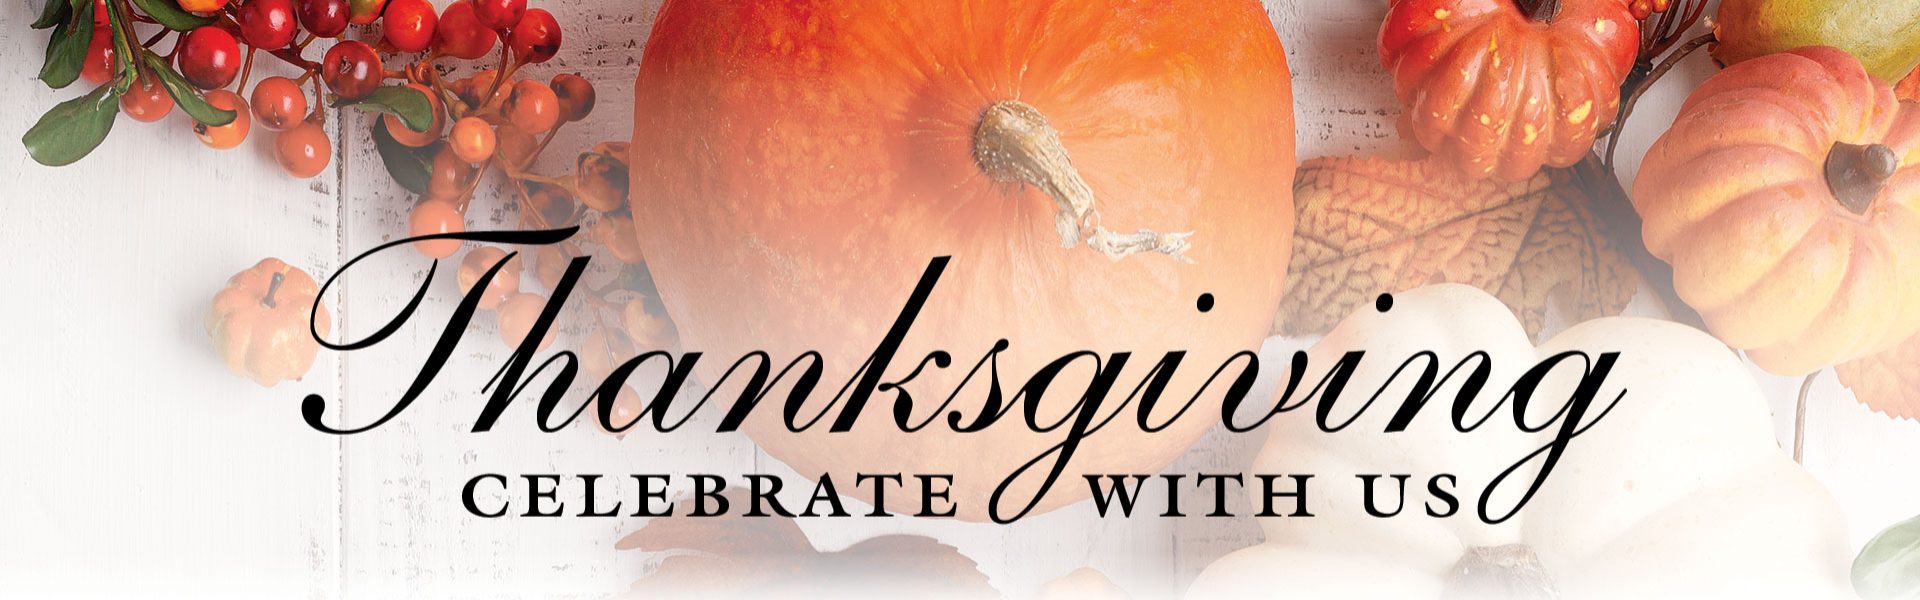 Celebrate Thanksgiving with Us